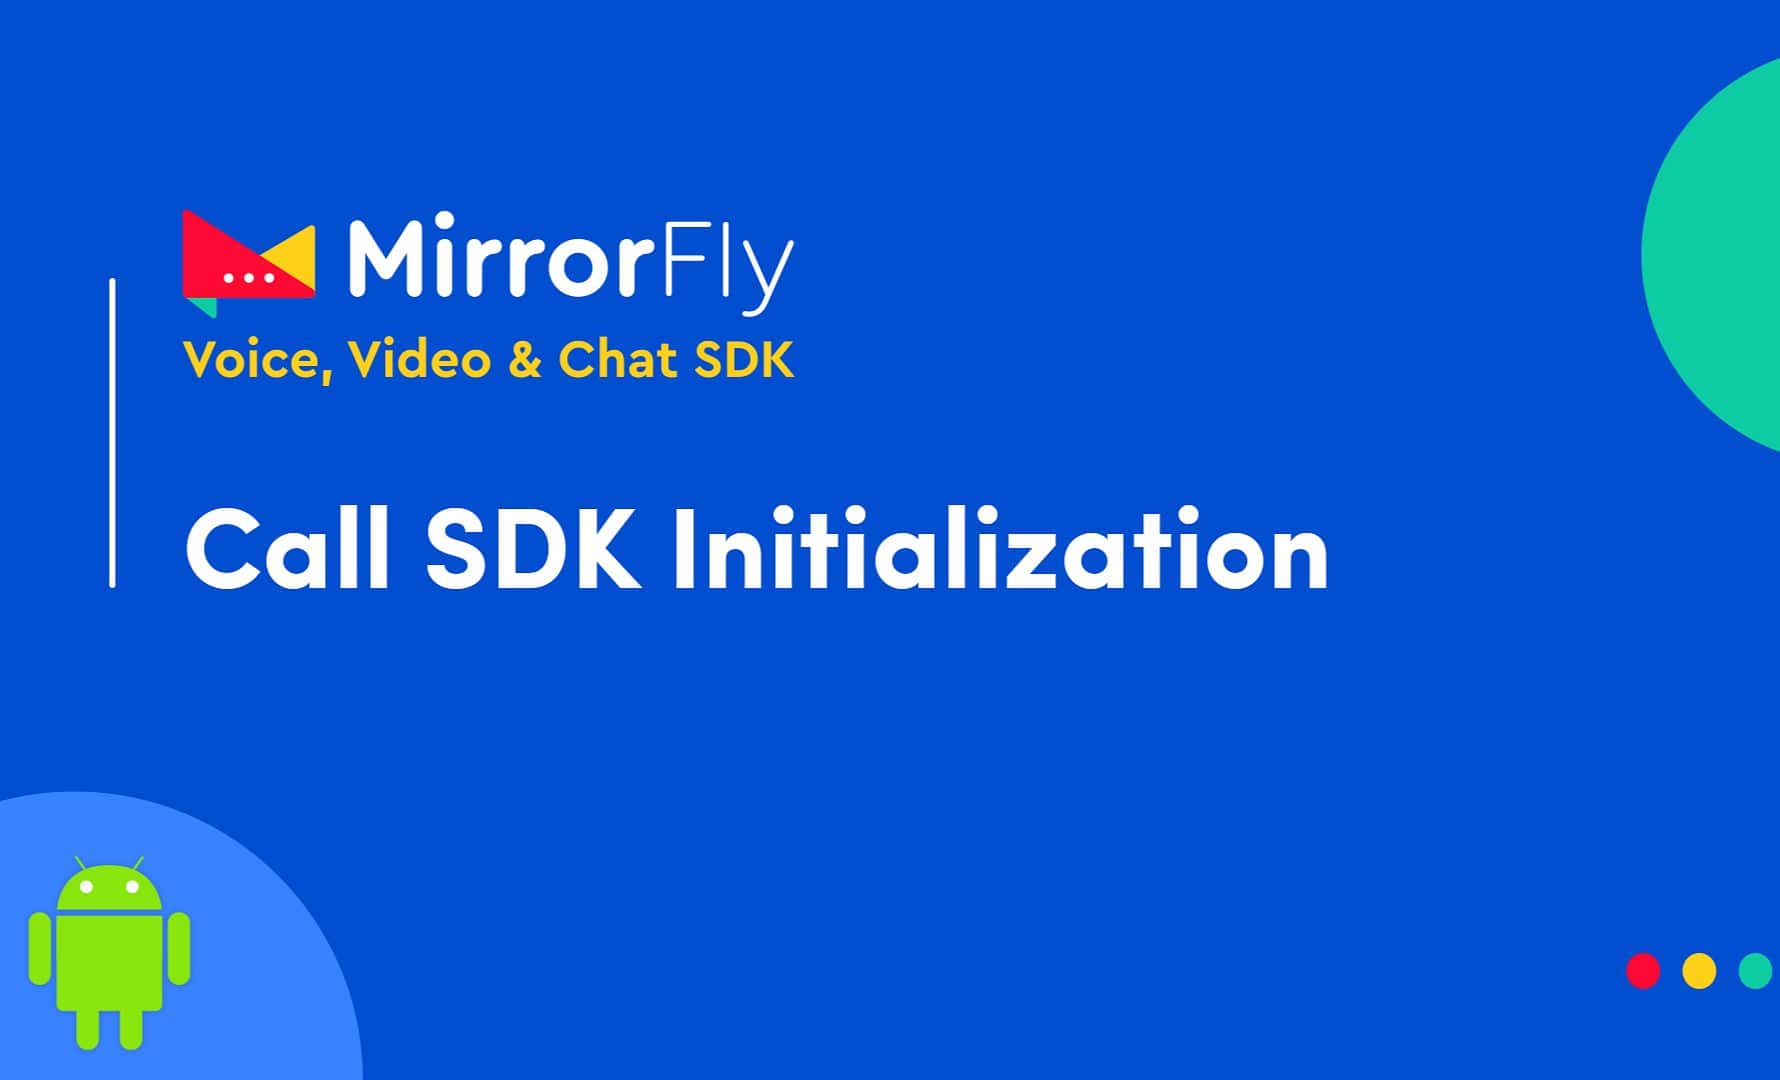 Call Initialization using MirrorFly’s SDK in Android Studio